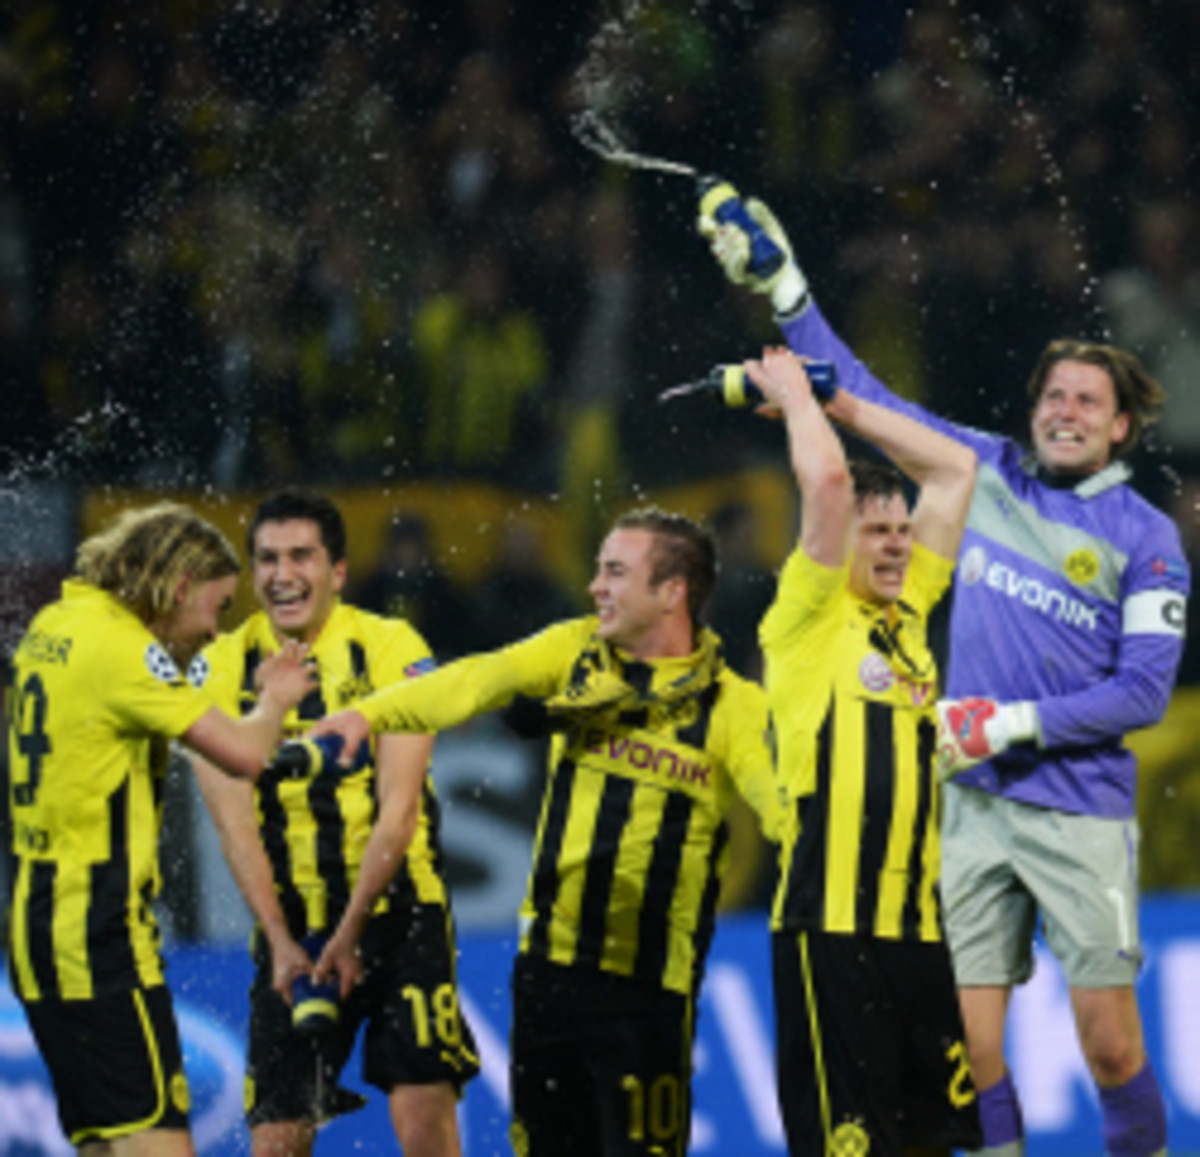 Borussia Dortmund players celebrate a Champions League semifinal match. The team recently announced a new partnership with Turkish Airlines. (Patrik Stollarz/Getty Images)